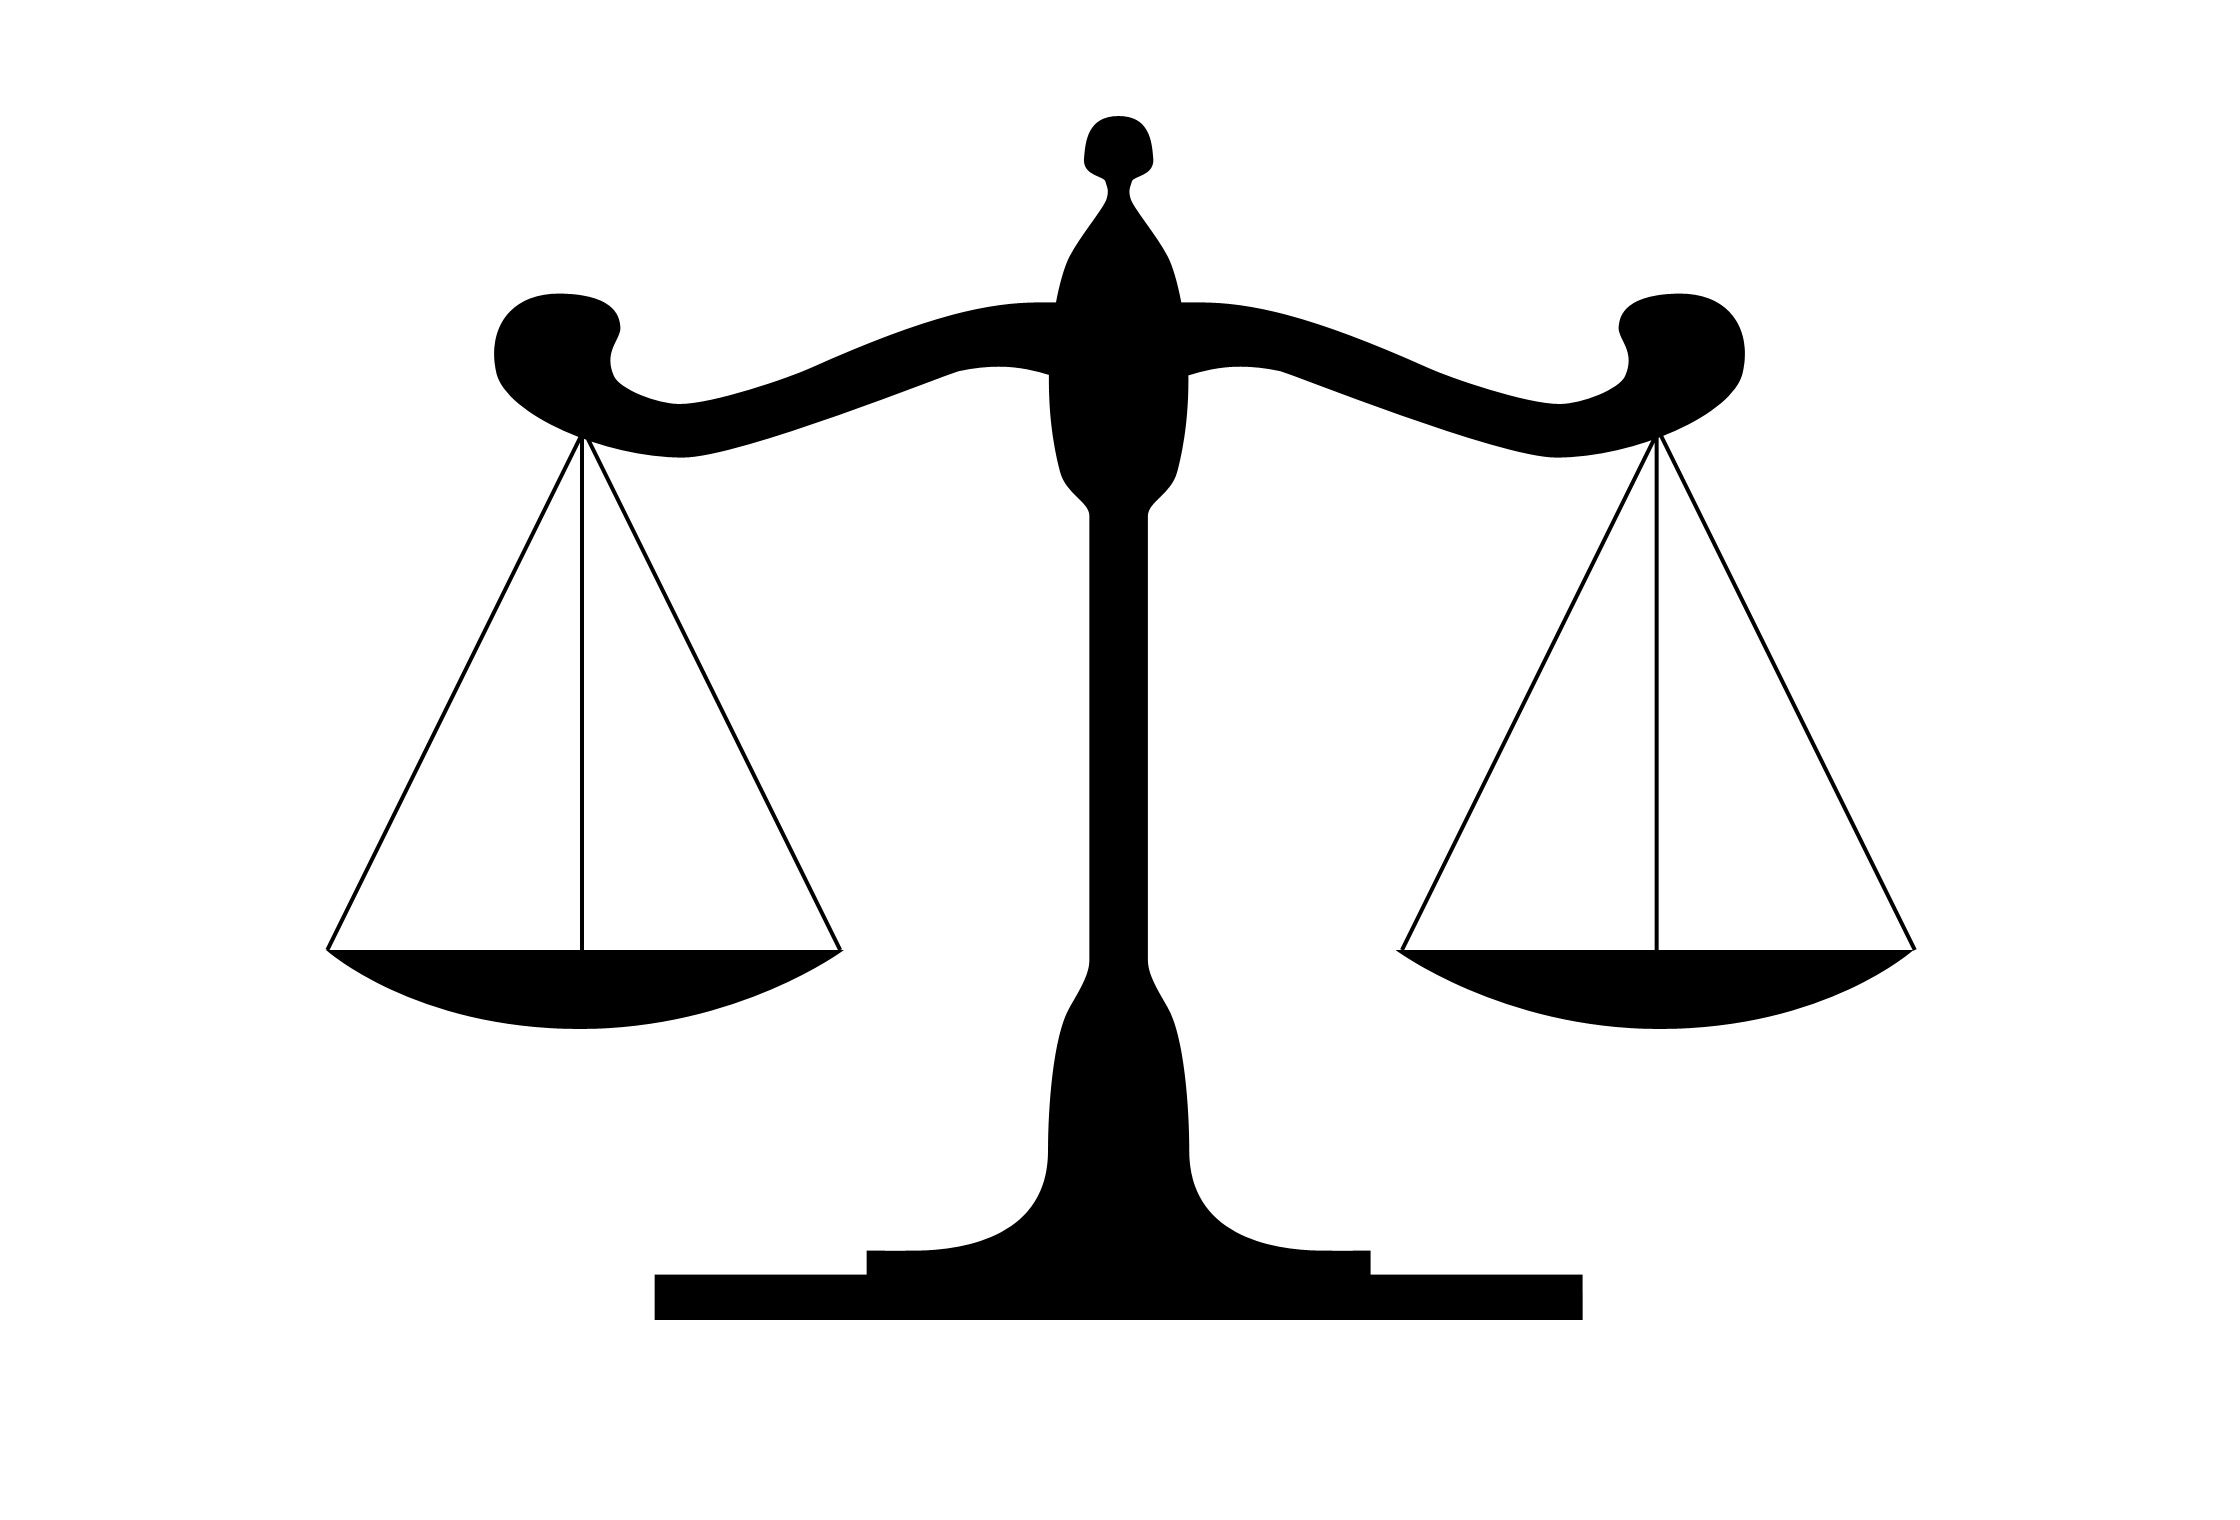 Image Of Scales Of Justice - ClipArt Best